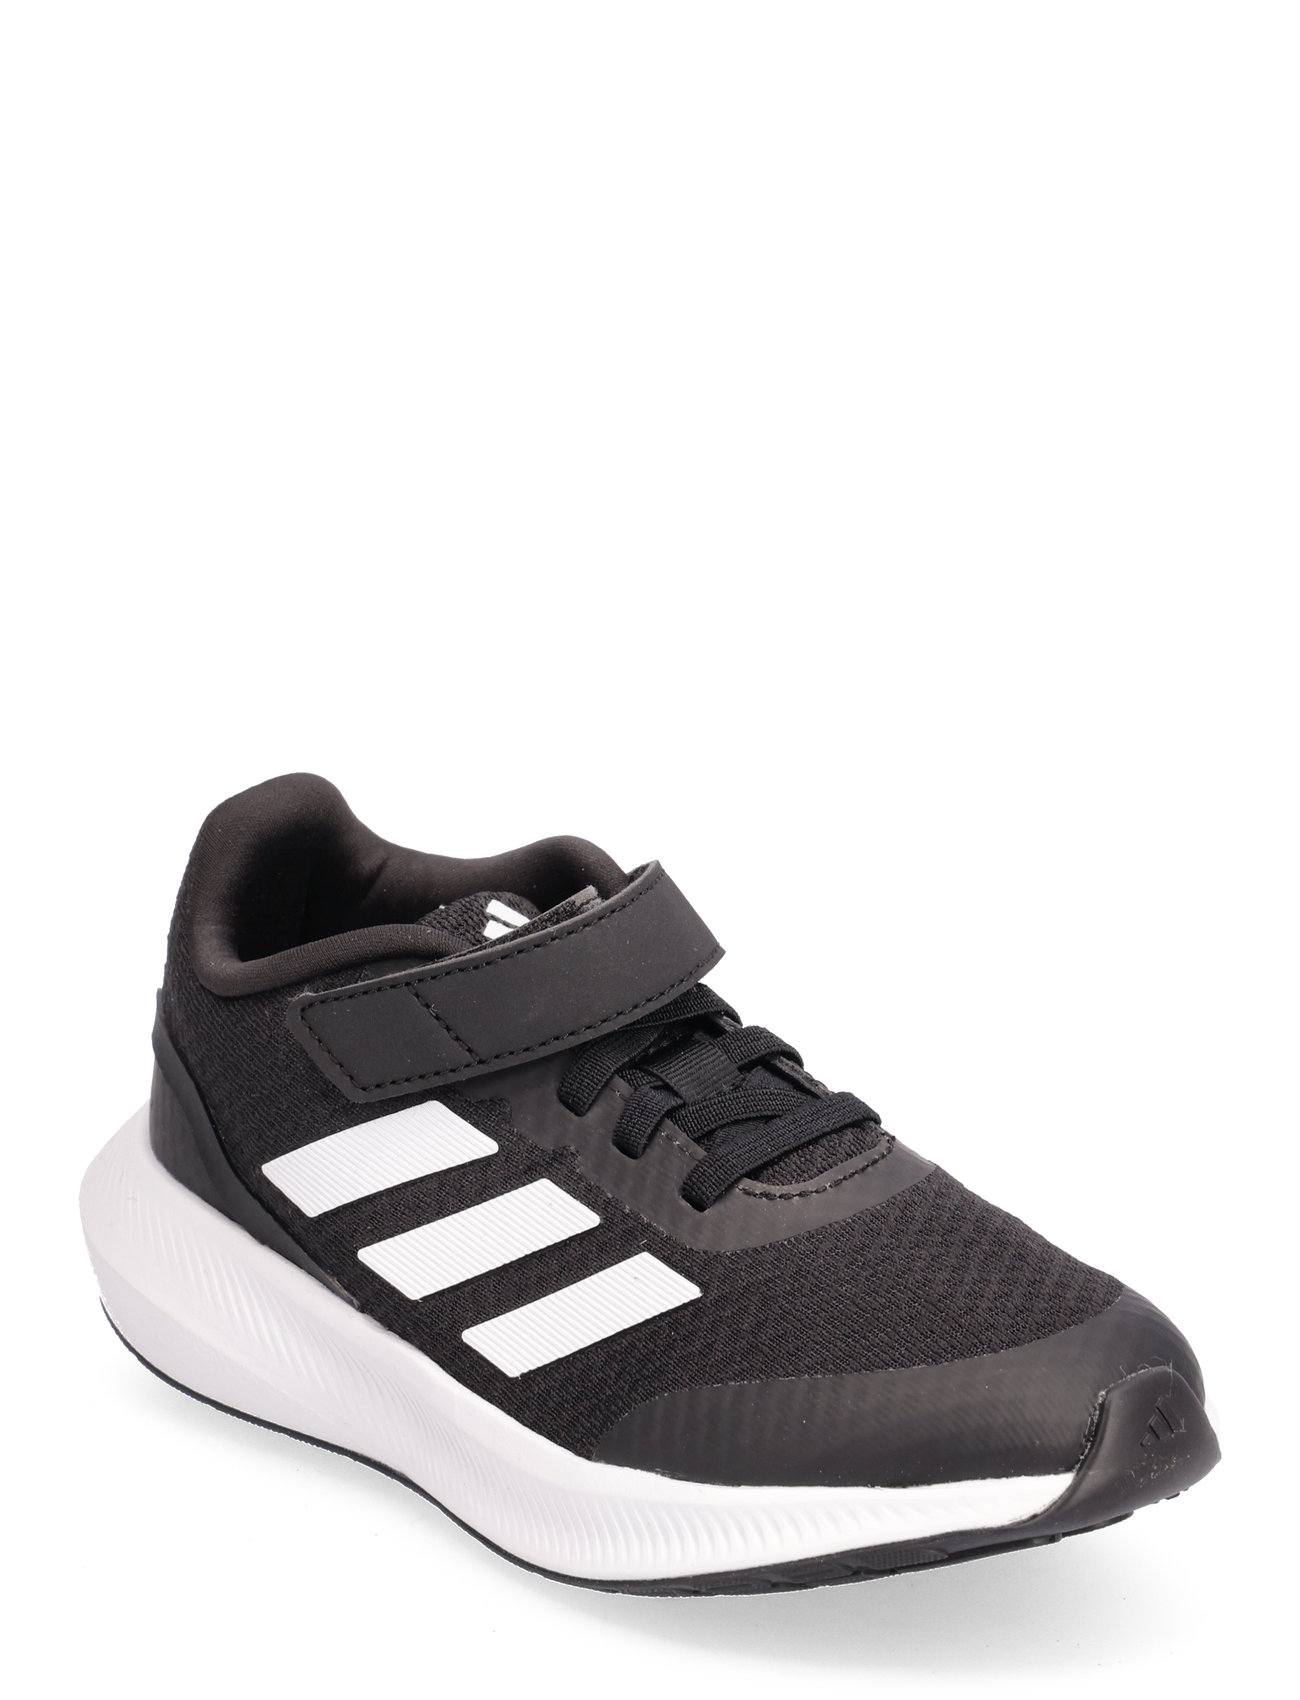 adidas Performance Low Top Tops Runfalcon 3.0 Shoes Lace Elastic Strap 